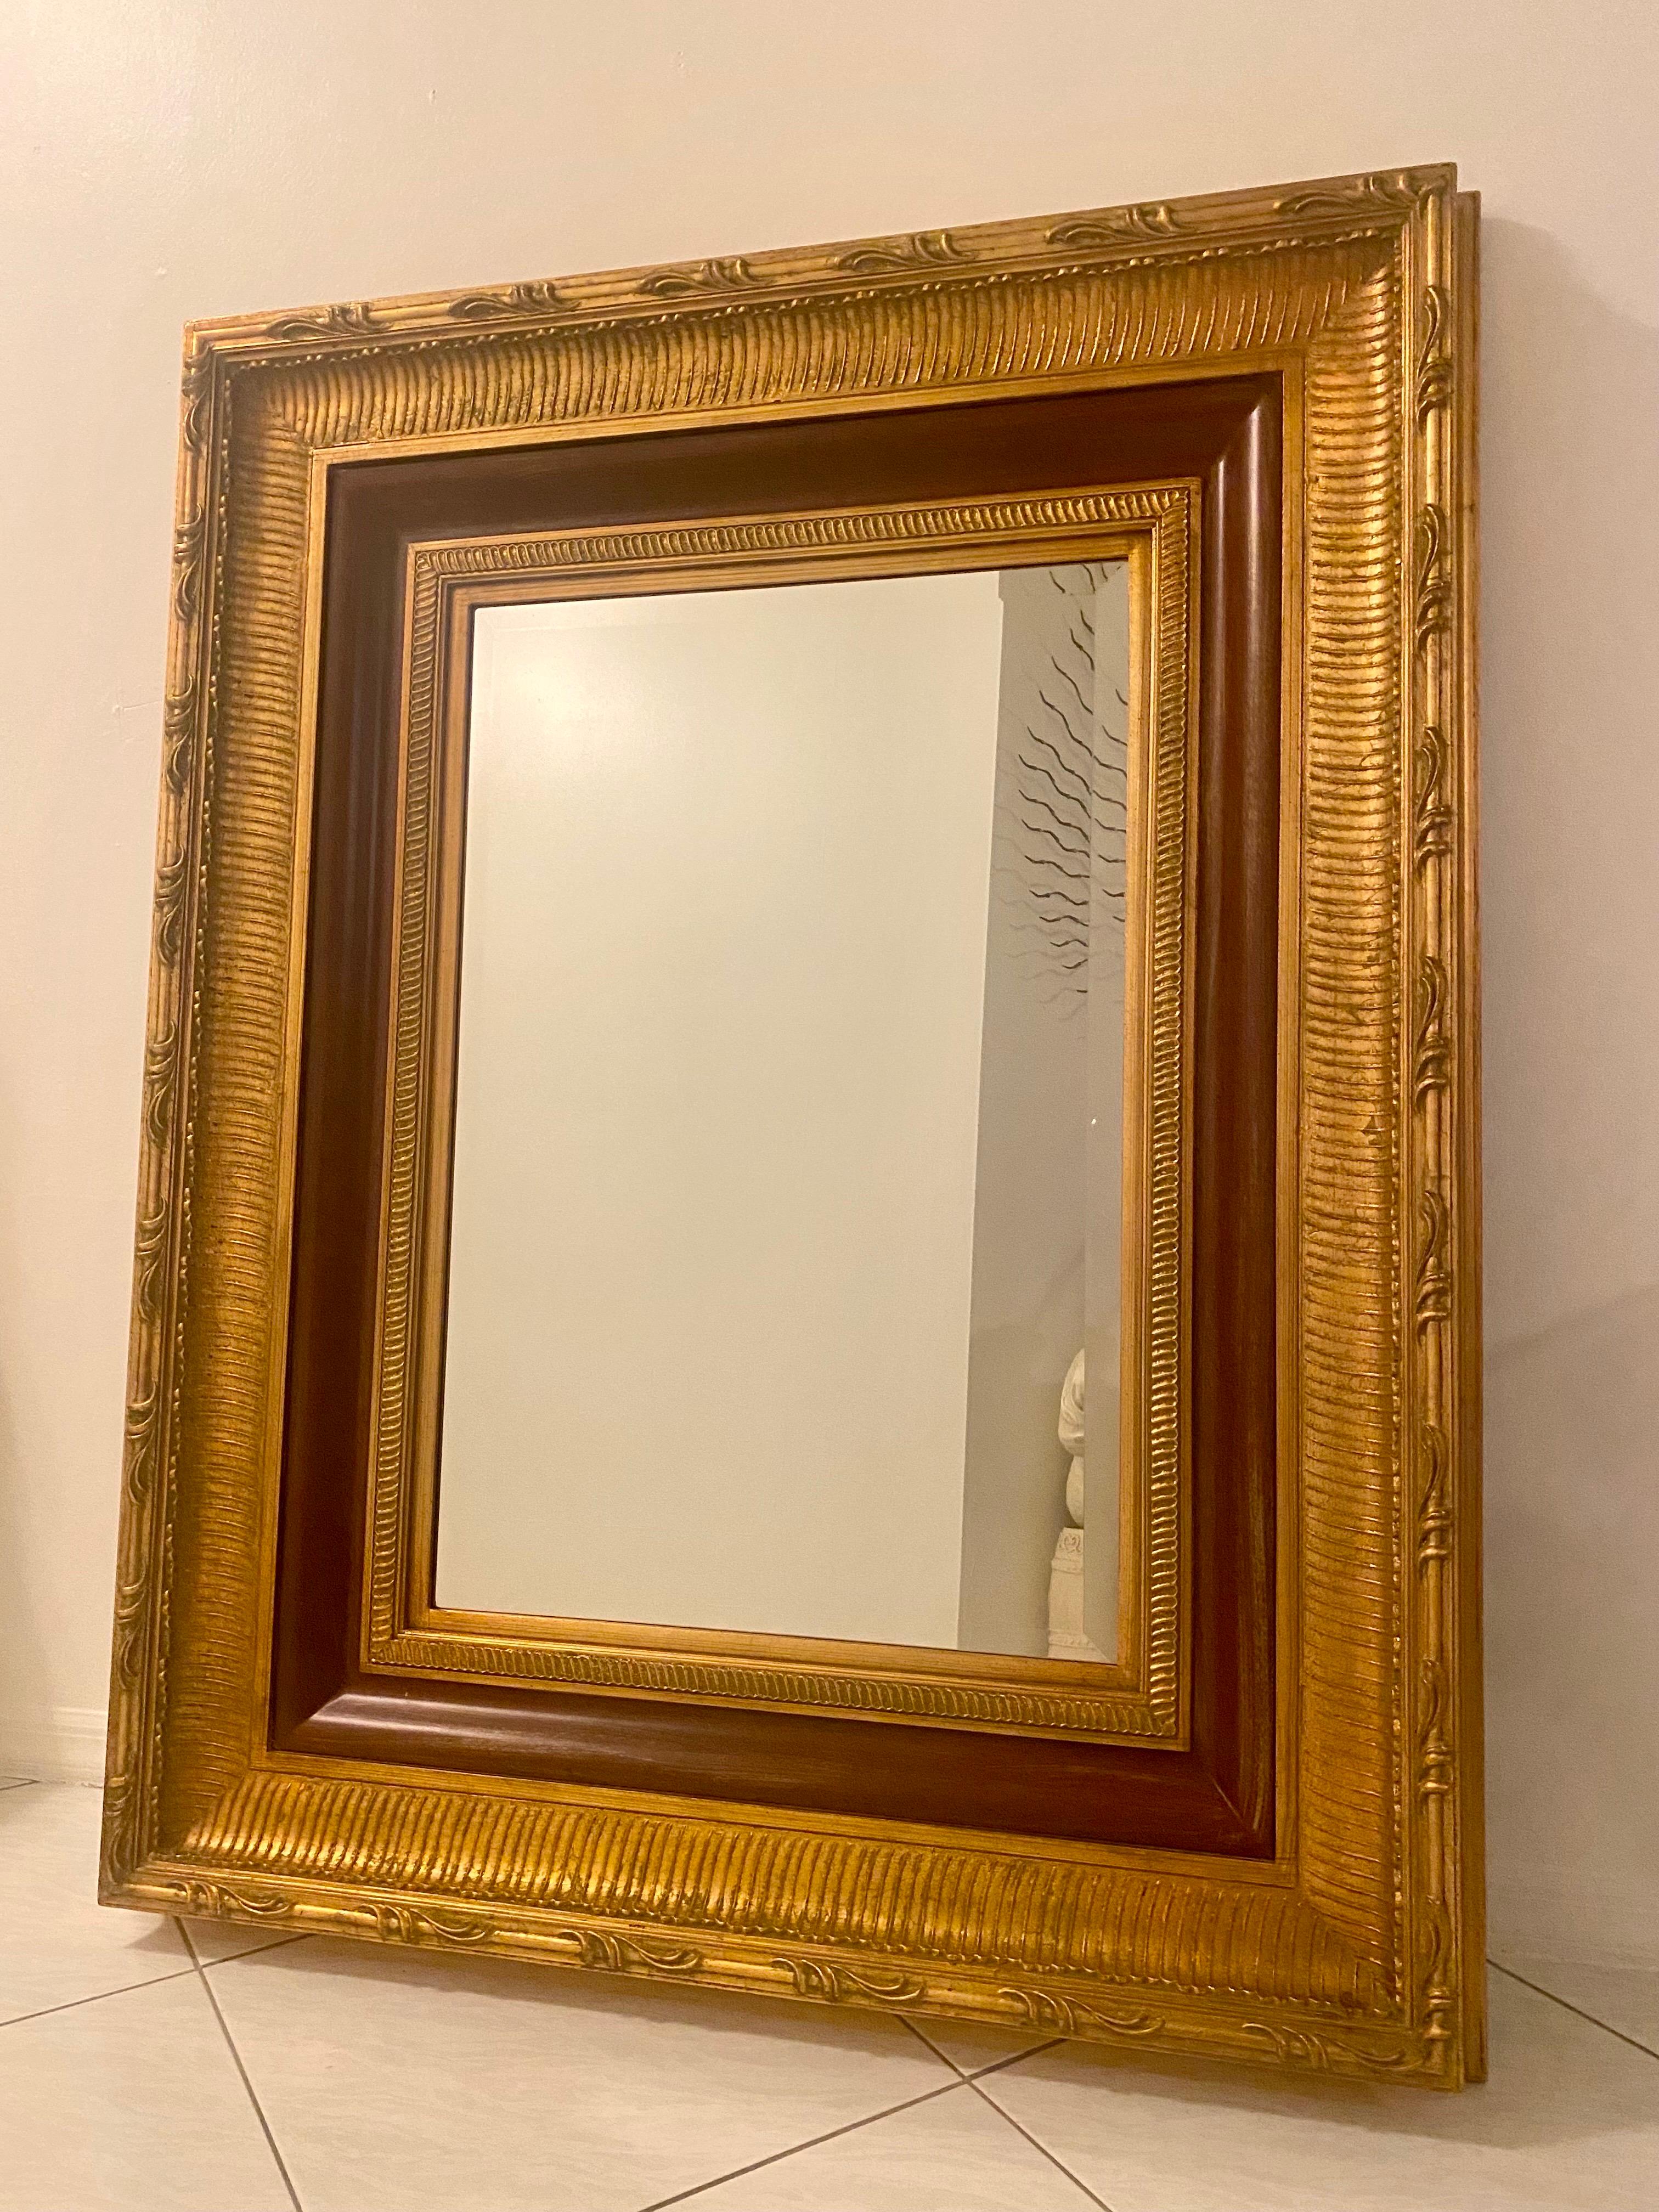 A large , great quality , gilt wood mirror in very good condition from an estate in Palm Beach. It is Hollywood Regency with a heavy luxury giltwood and a metal back hanging system. The mirror is in beautiful condition and a gorgeous addition to